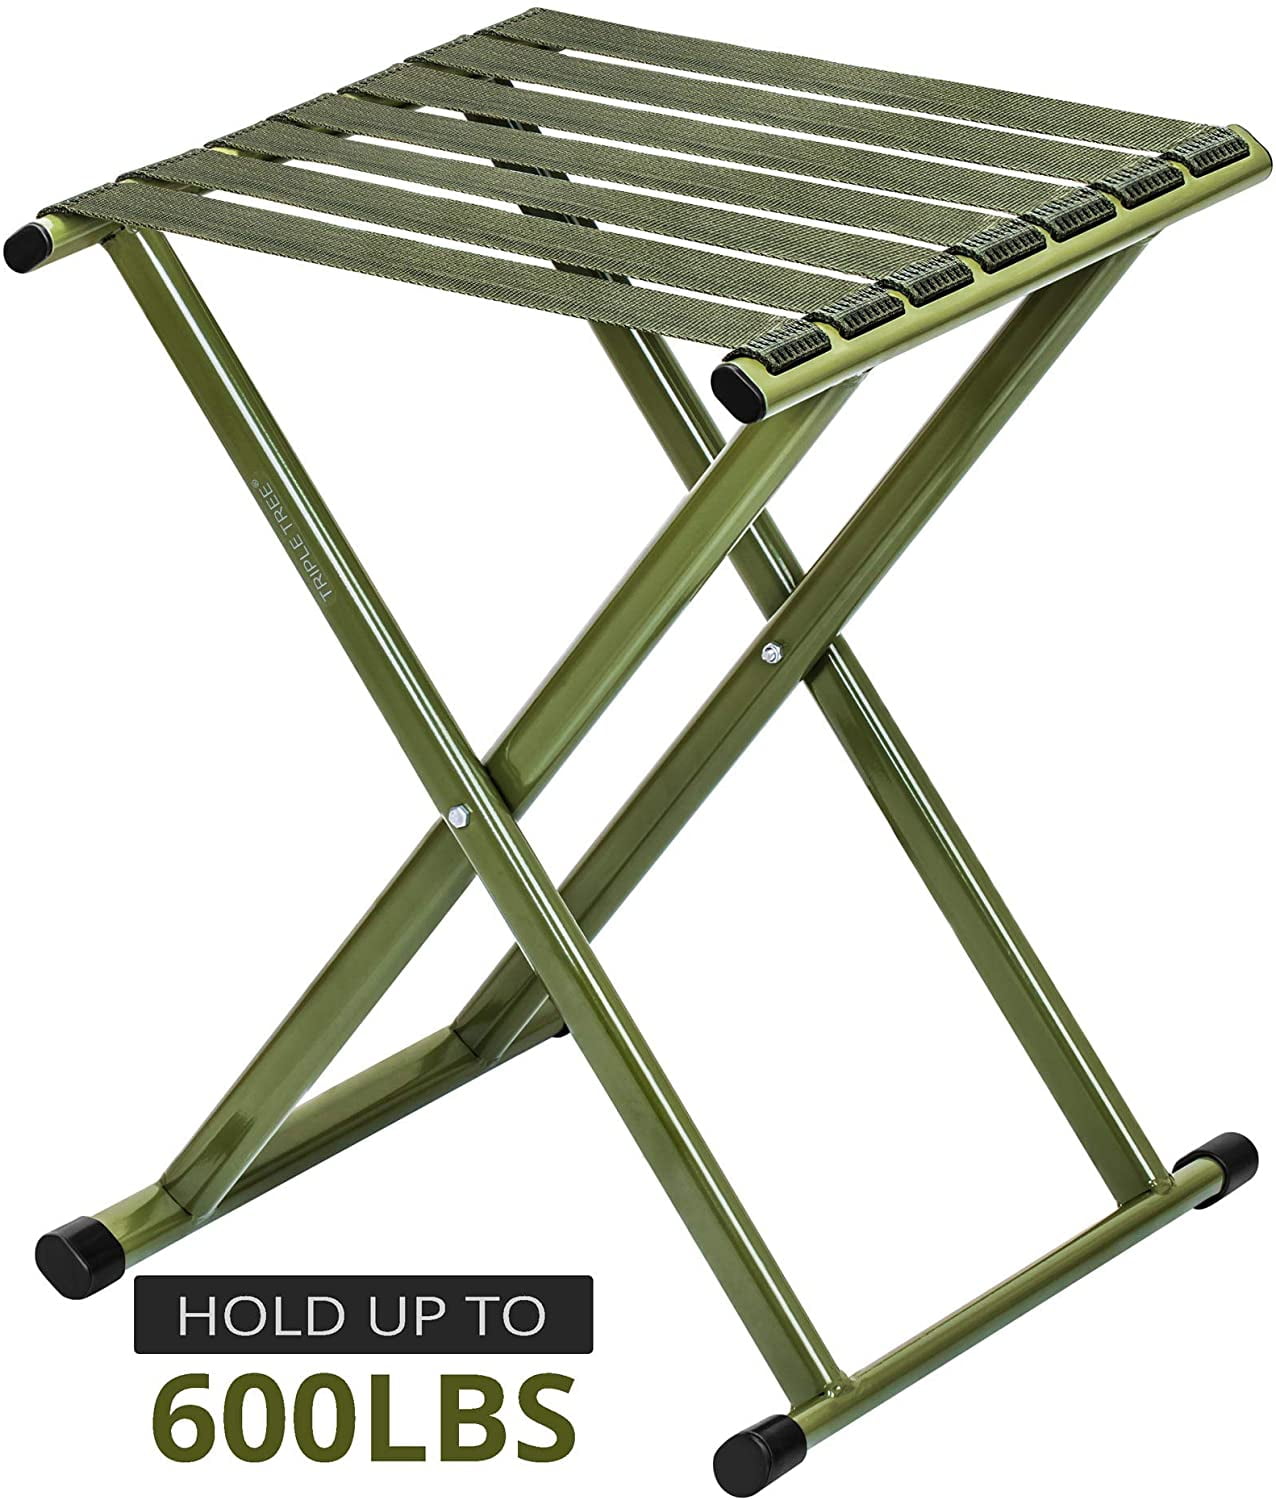 Omenluck 1Pc Folding Chair Portable Fold Step Stool for Kitchen Easy Transport Kids Adults 